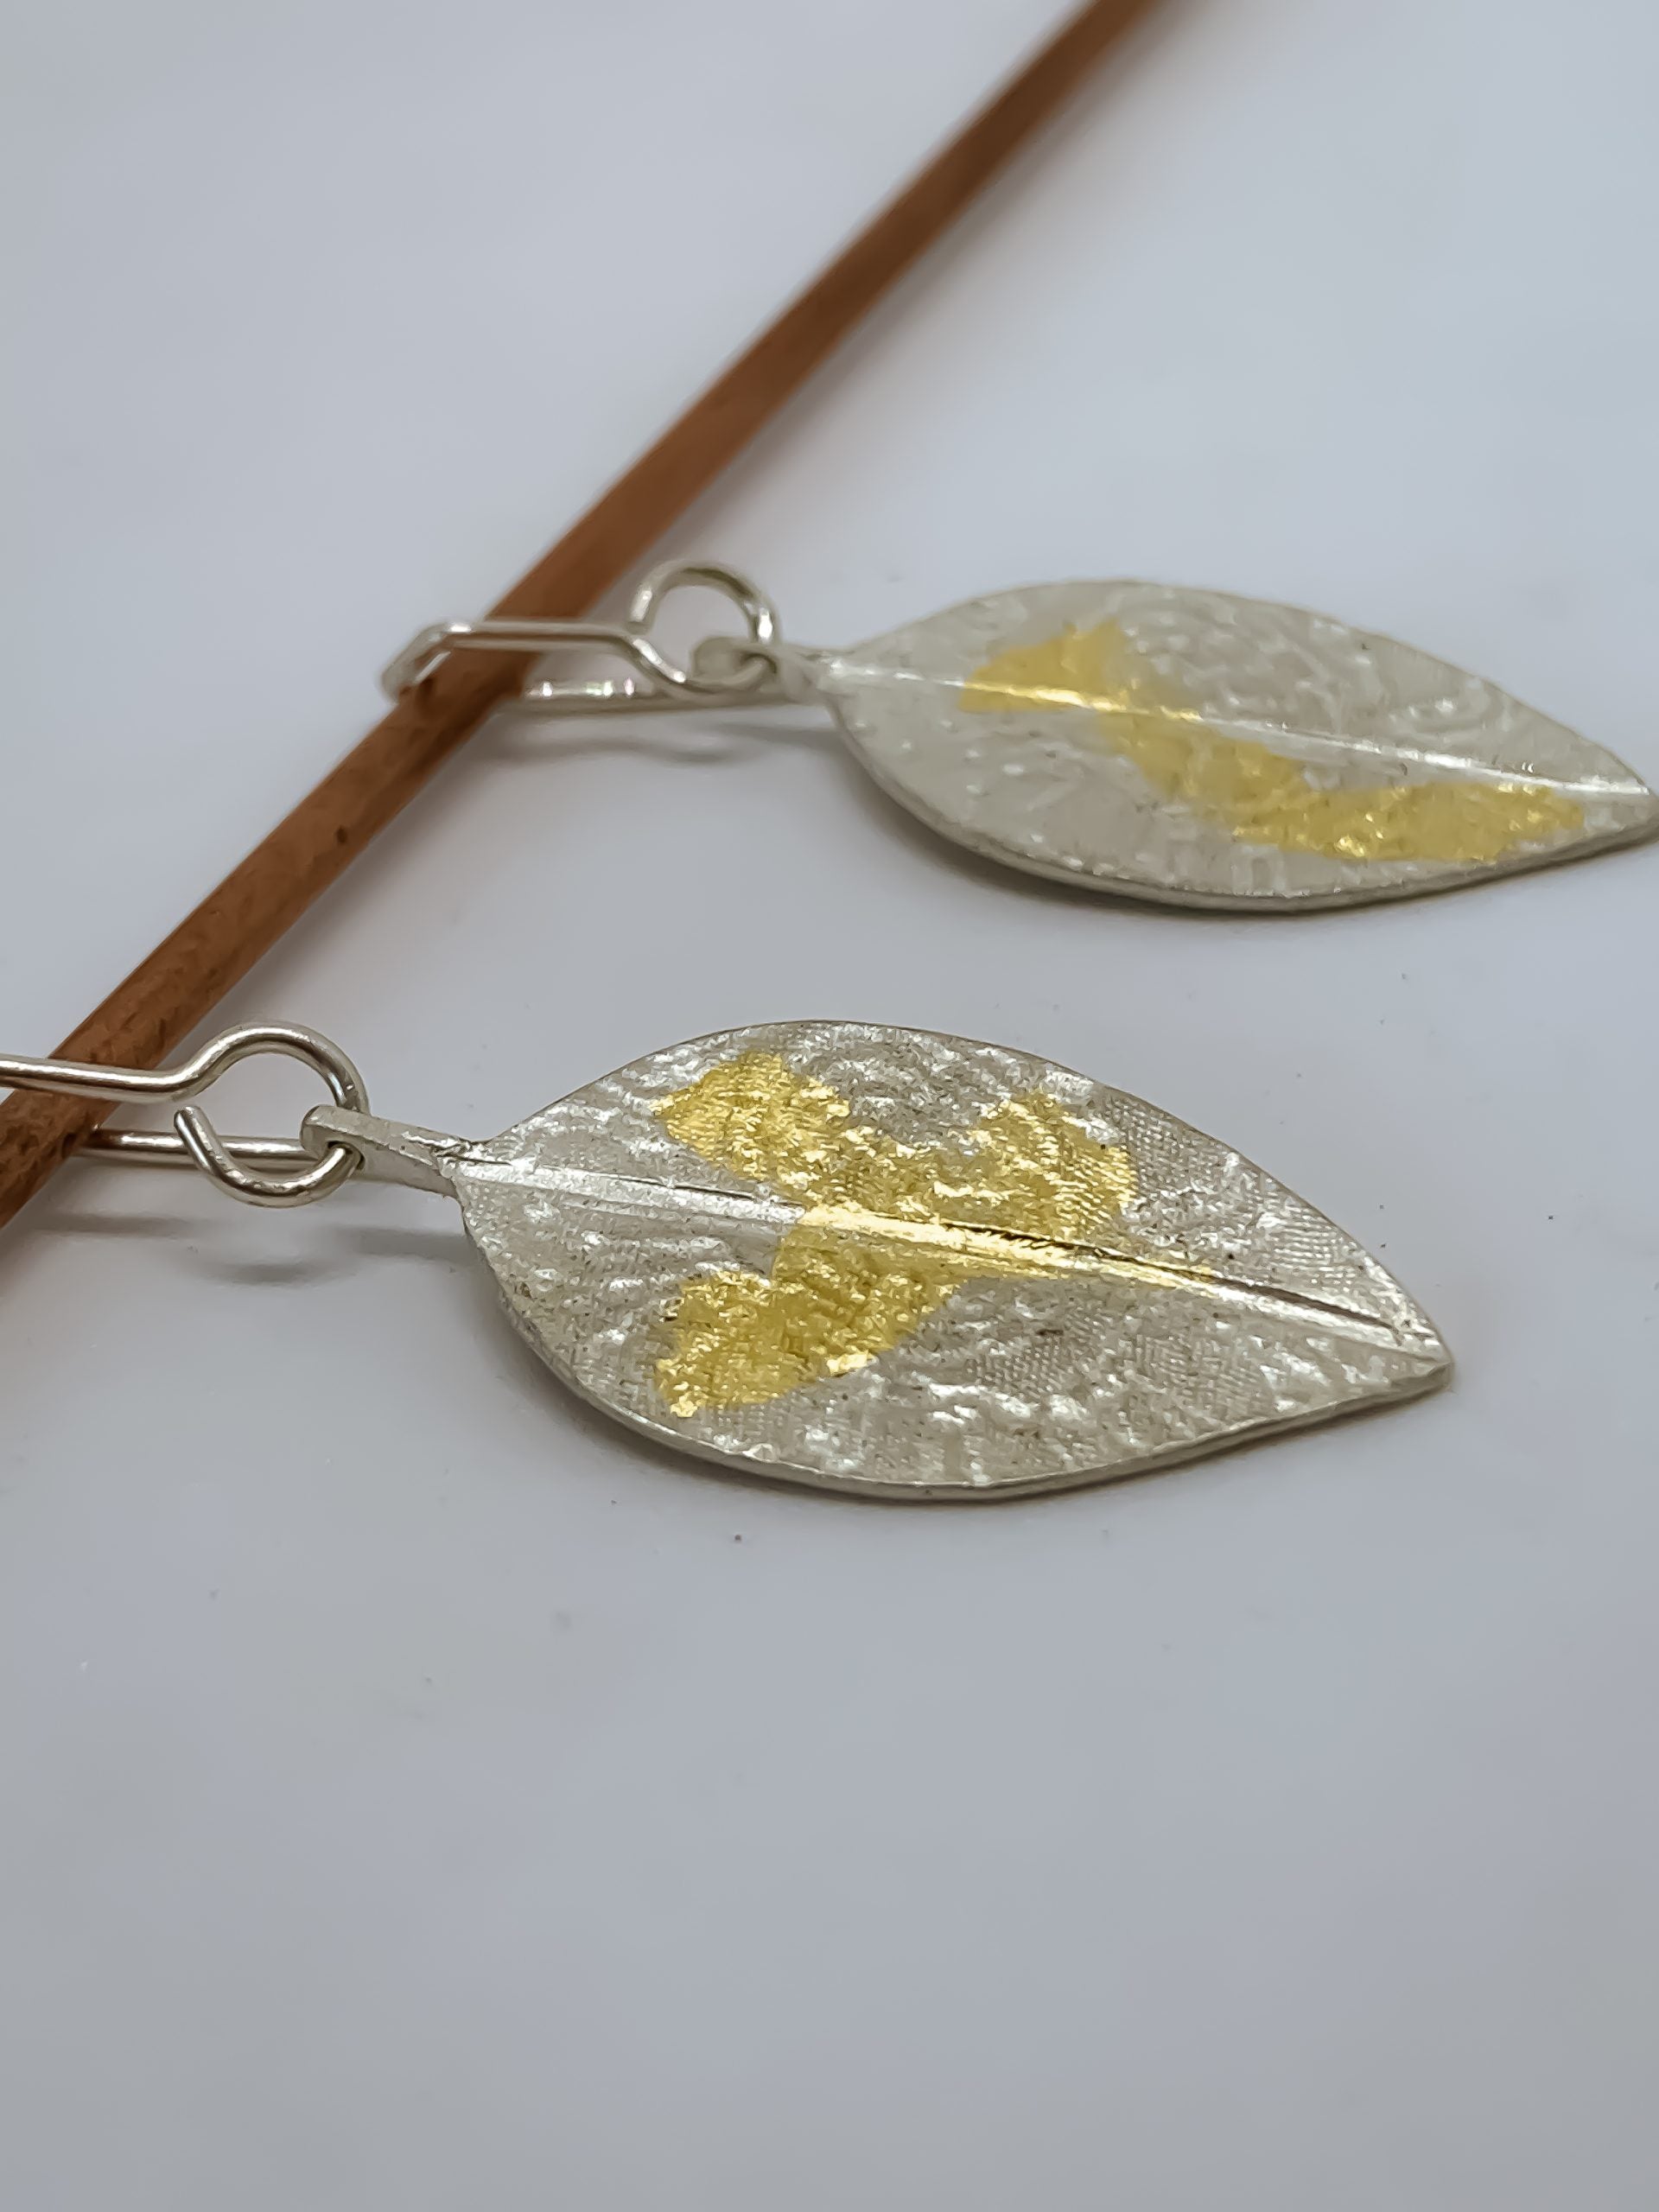 A pair of stylised leaf dangle earrings embosed with lace designs and patterns of 24ct Gold leaf applied